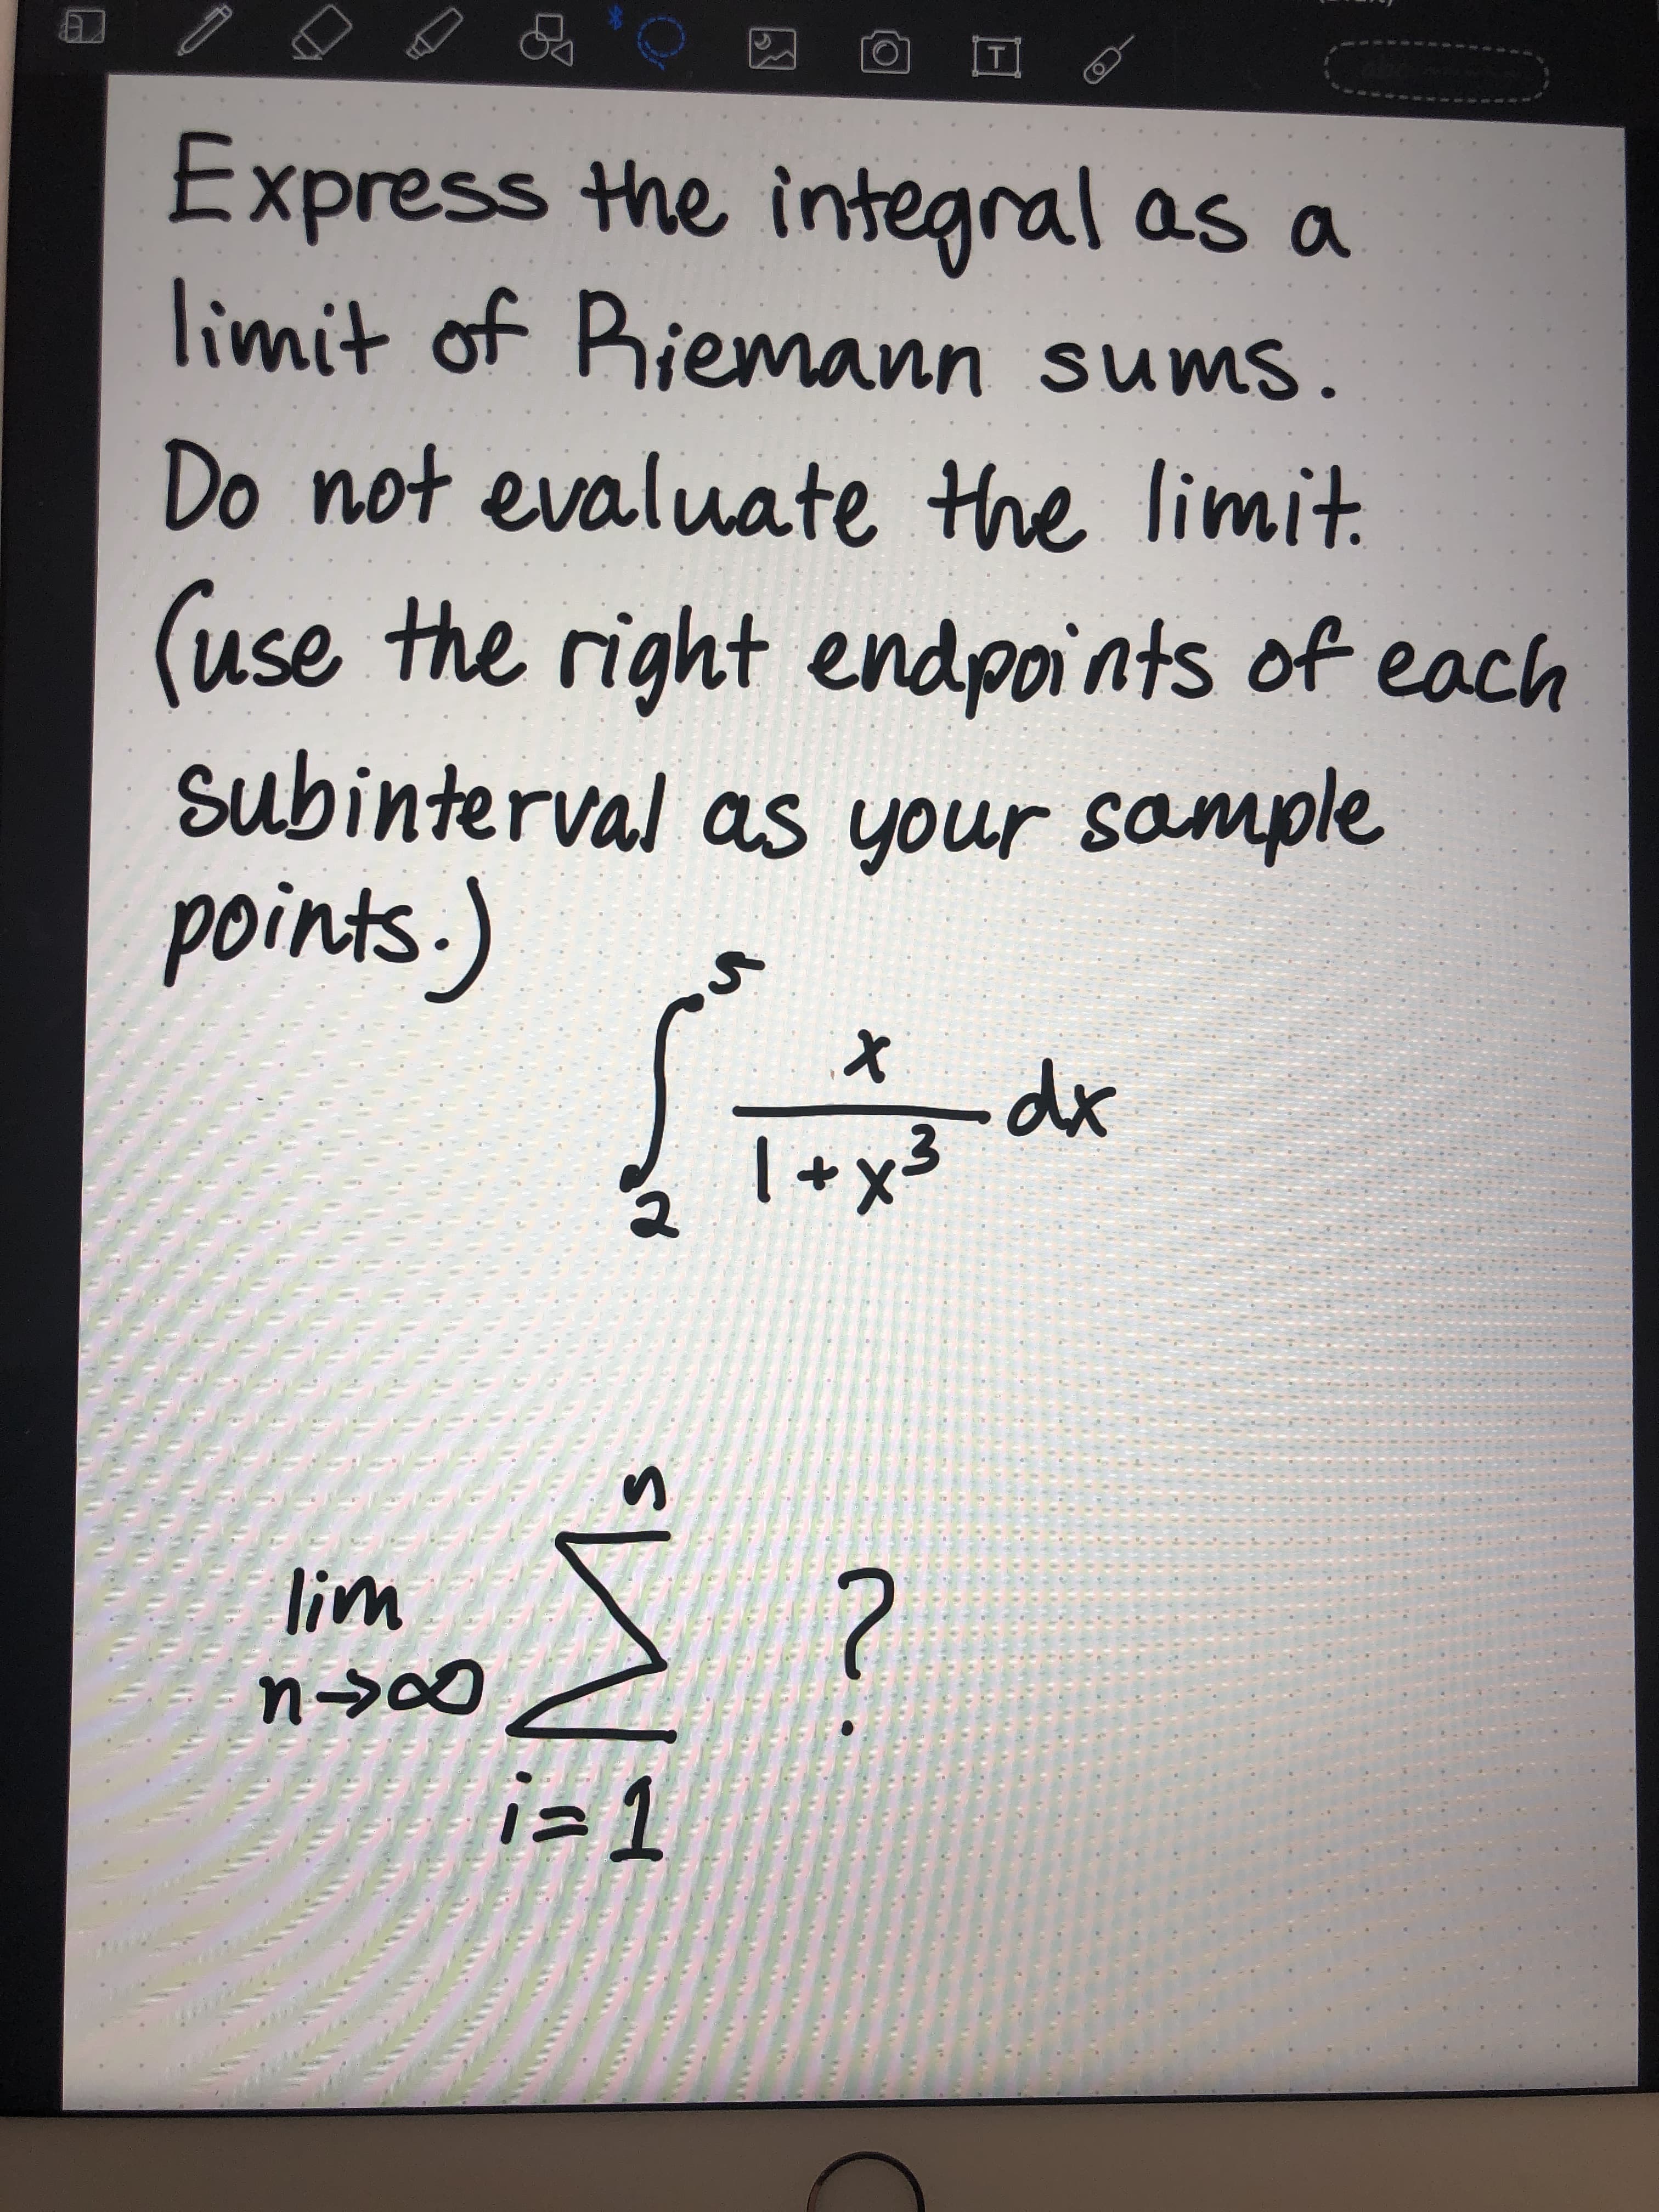 Express the integral as a
limit of Riemann sums.
Do not evaluate the limit.
(use the right endpoints of each
